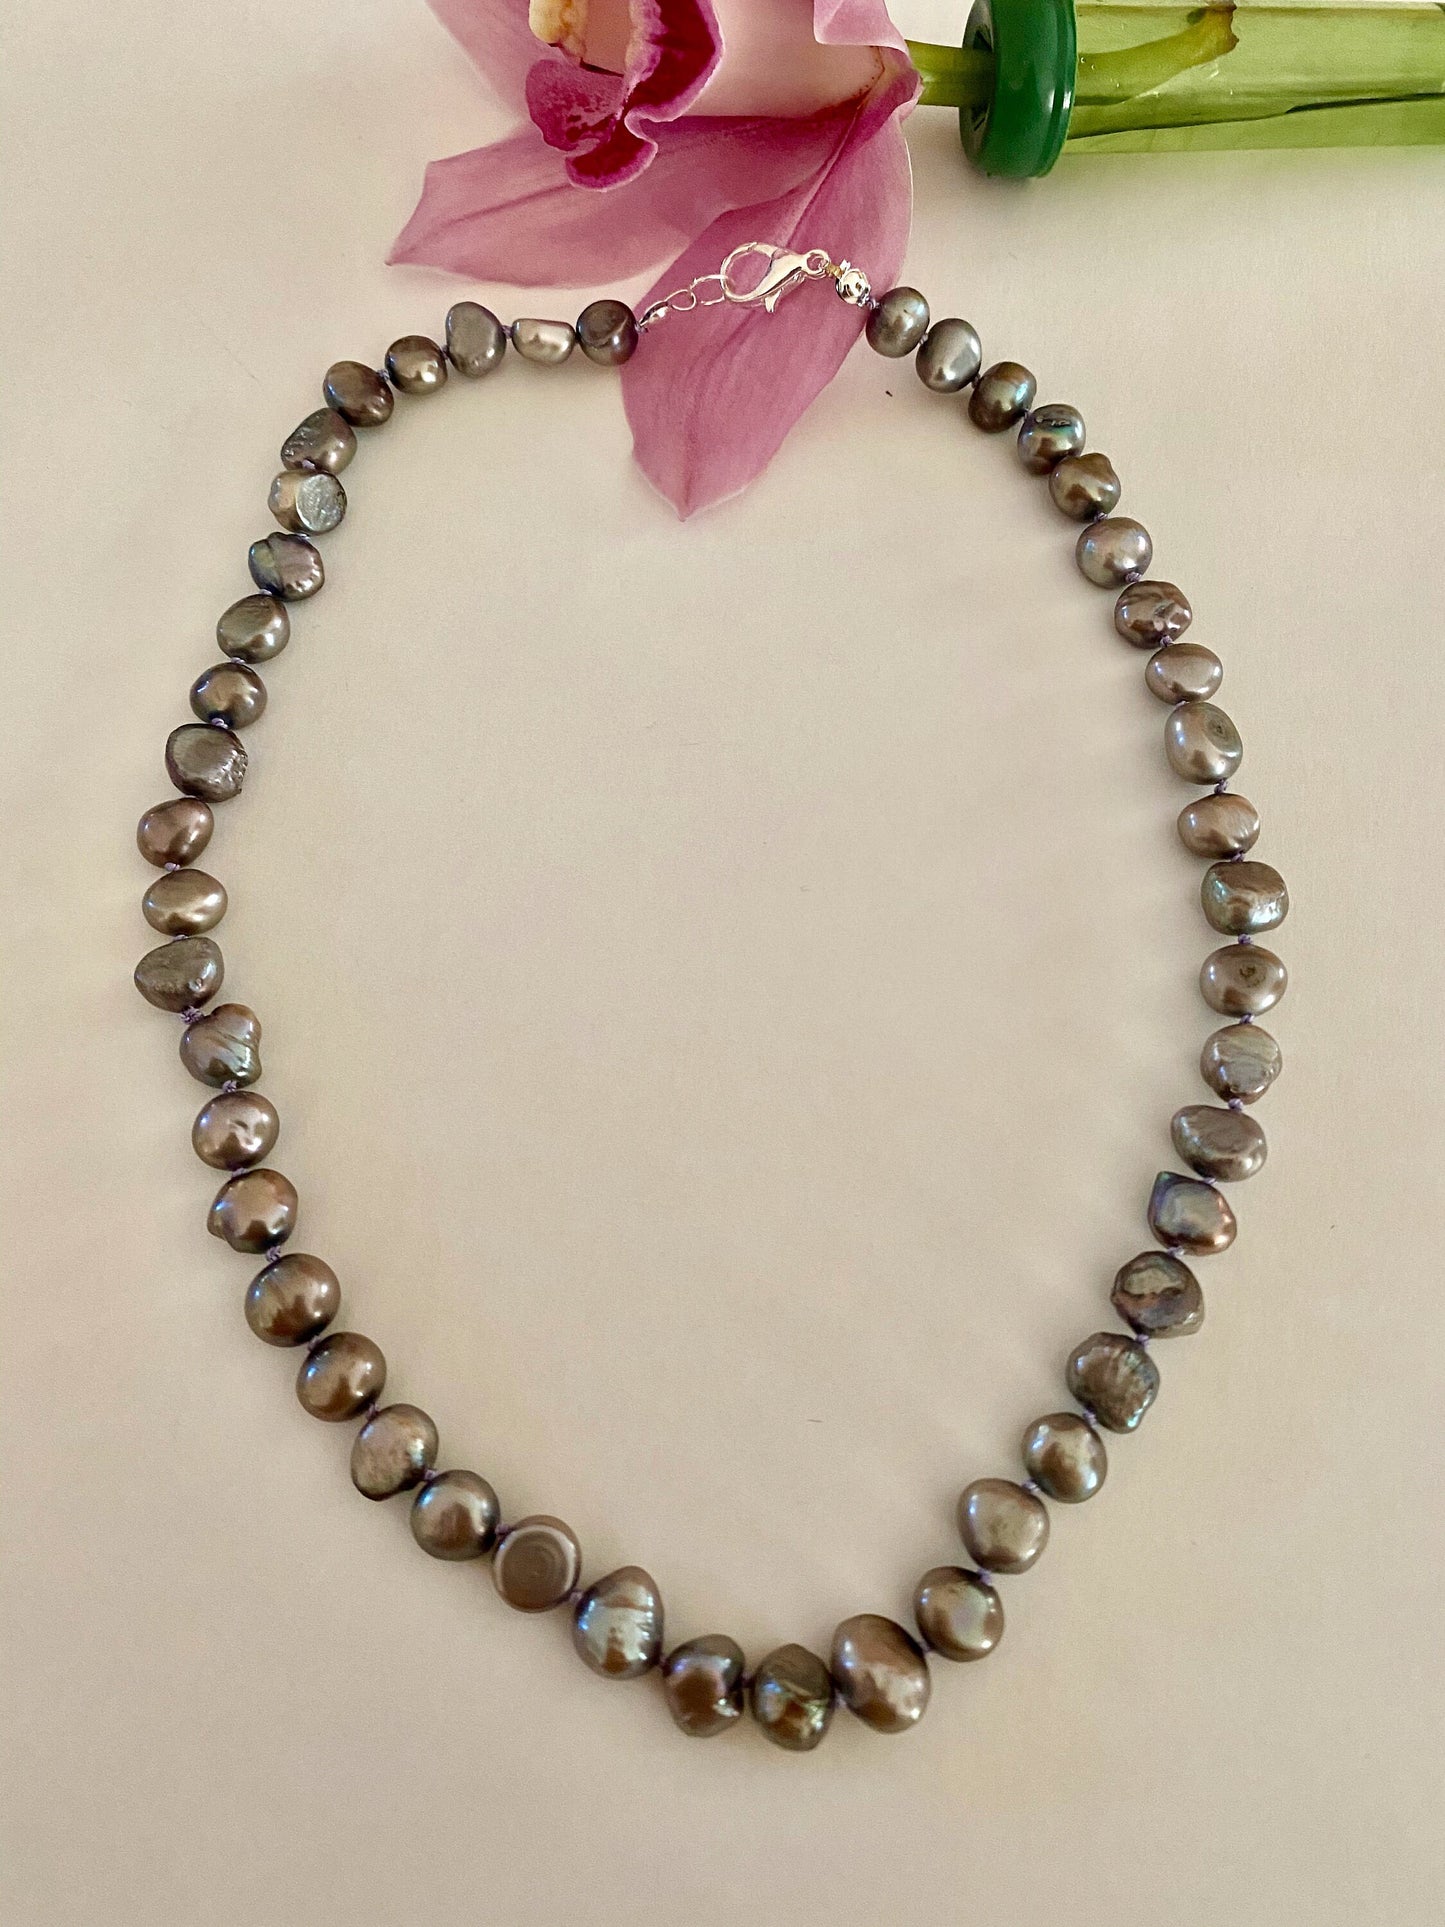 Pearls. Beautiful black/purple Aurora Borealis  knotted fresh water pearl necklace. The necklace is finished with a quality silver magnetic clasp.